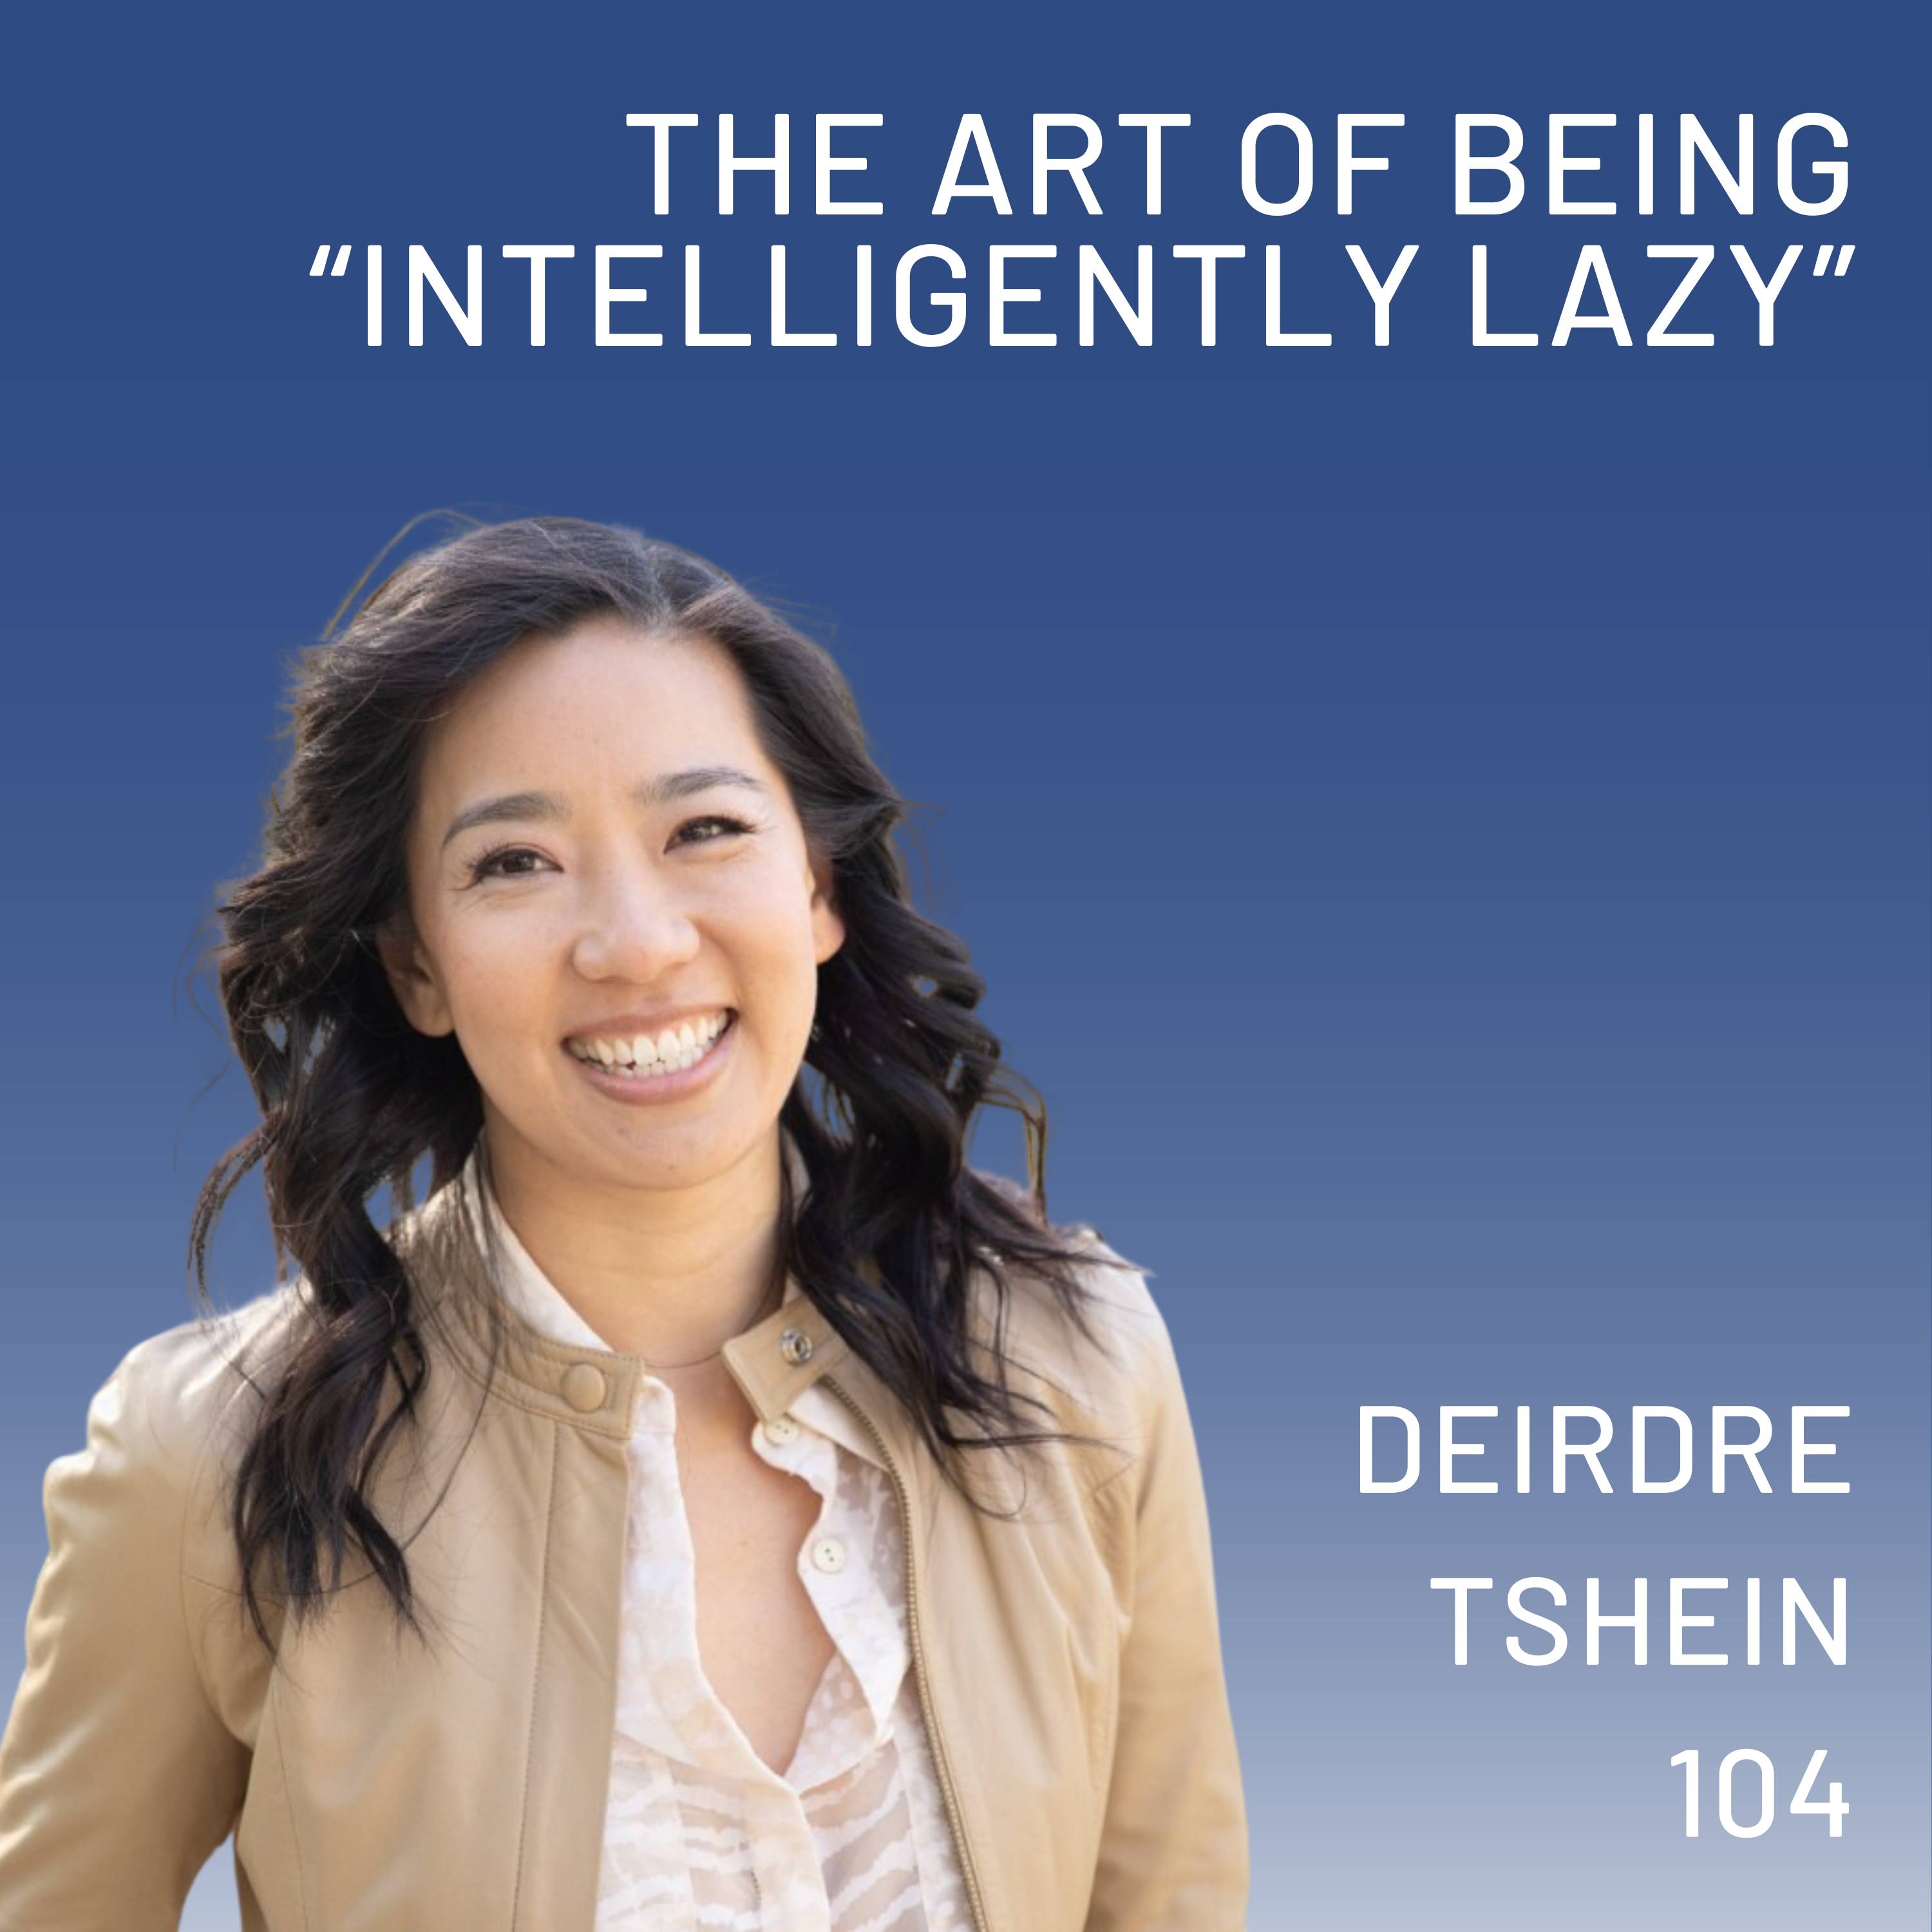 From Dessert Bars to AI Tools: The Entrepreneurial Journey of Deirdre Tshein, CEO of Capsho